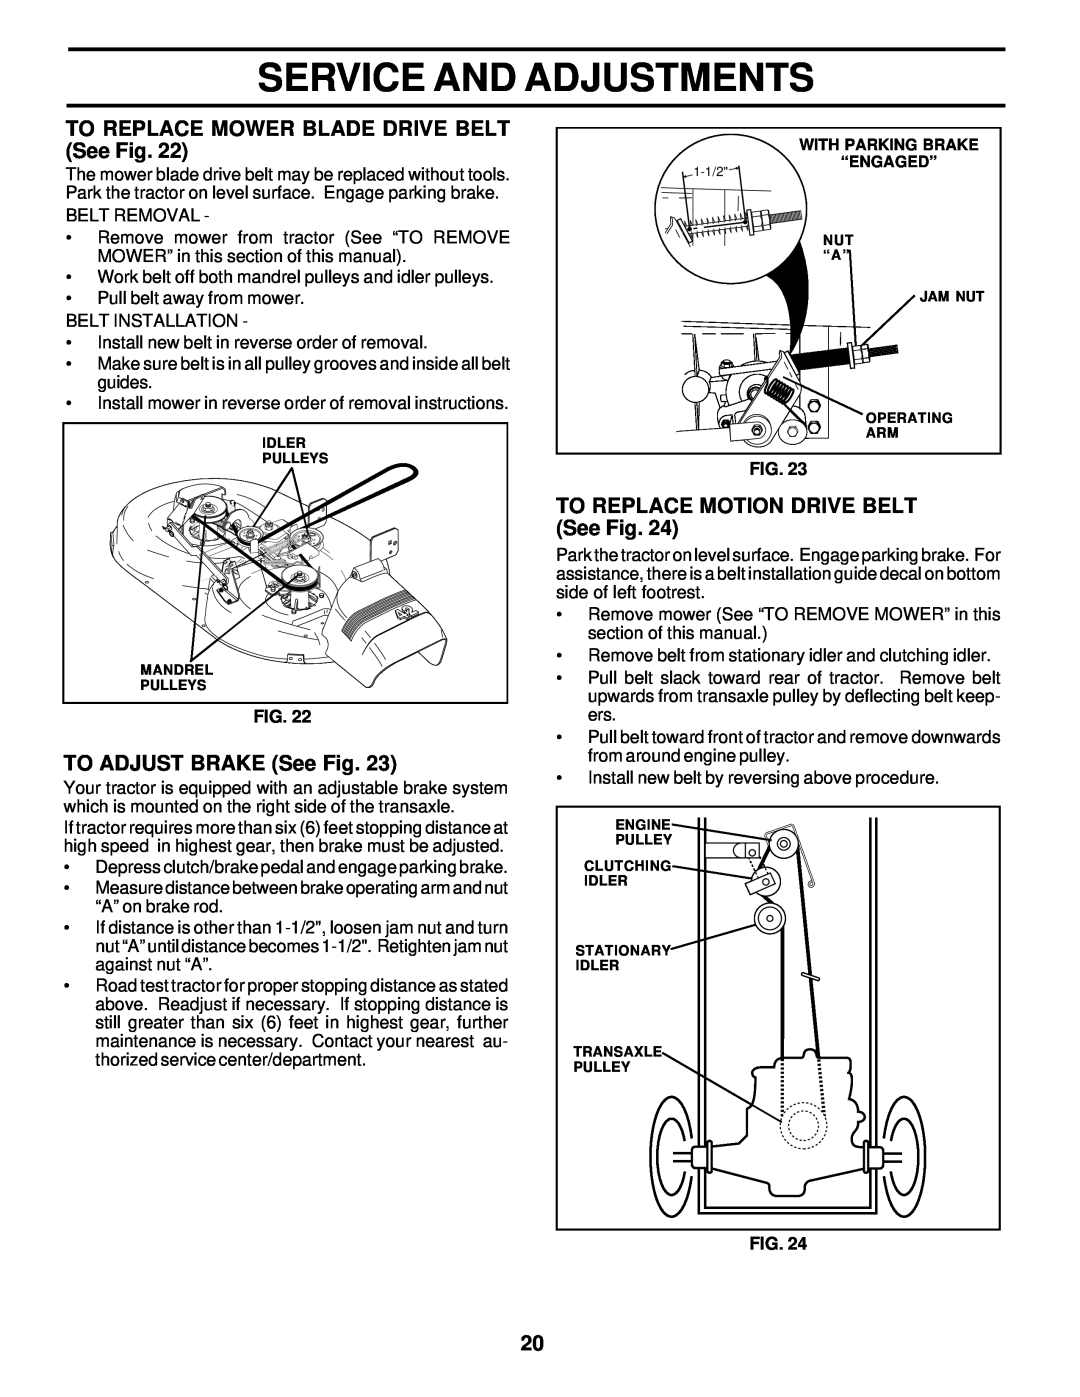 Poulan PRK17G42STA TO REPLACE MOWER BLADE DRIVE BELT See Fig, TO ADJUST BRAKE See Fig, Service And Adjustments, “Engaged” 